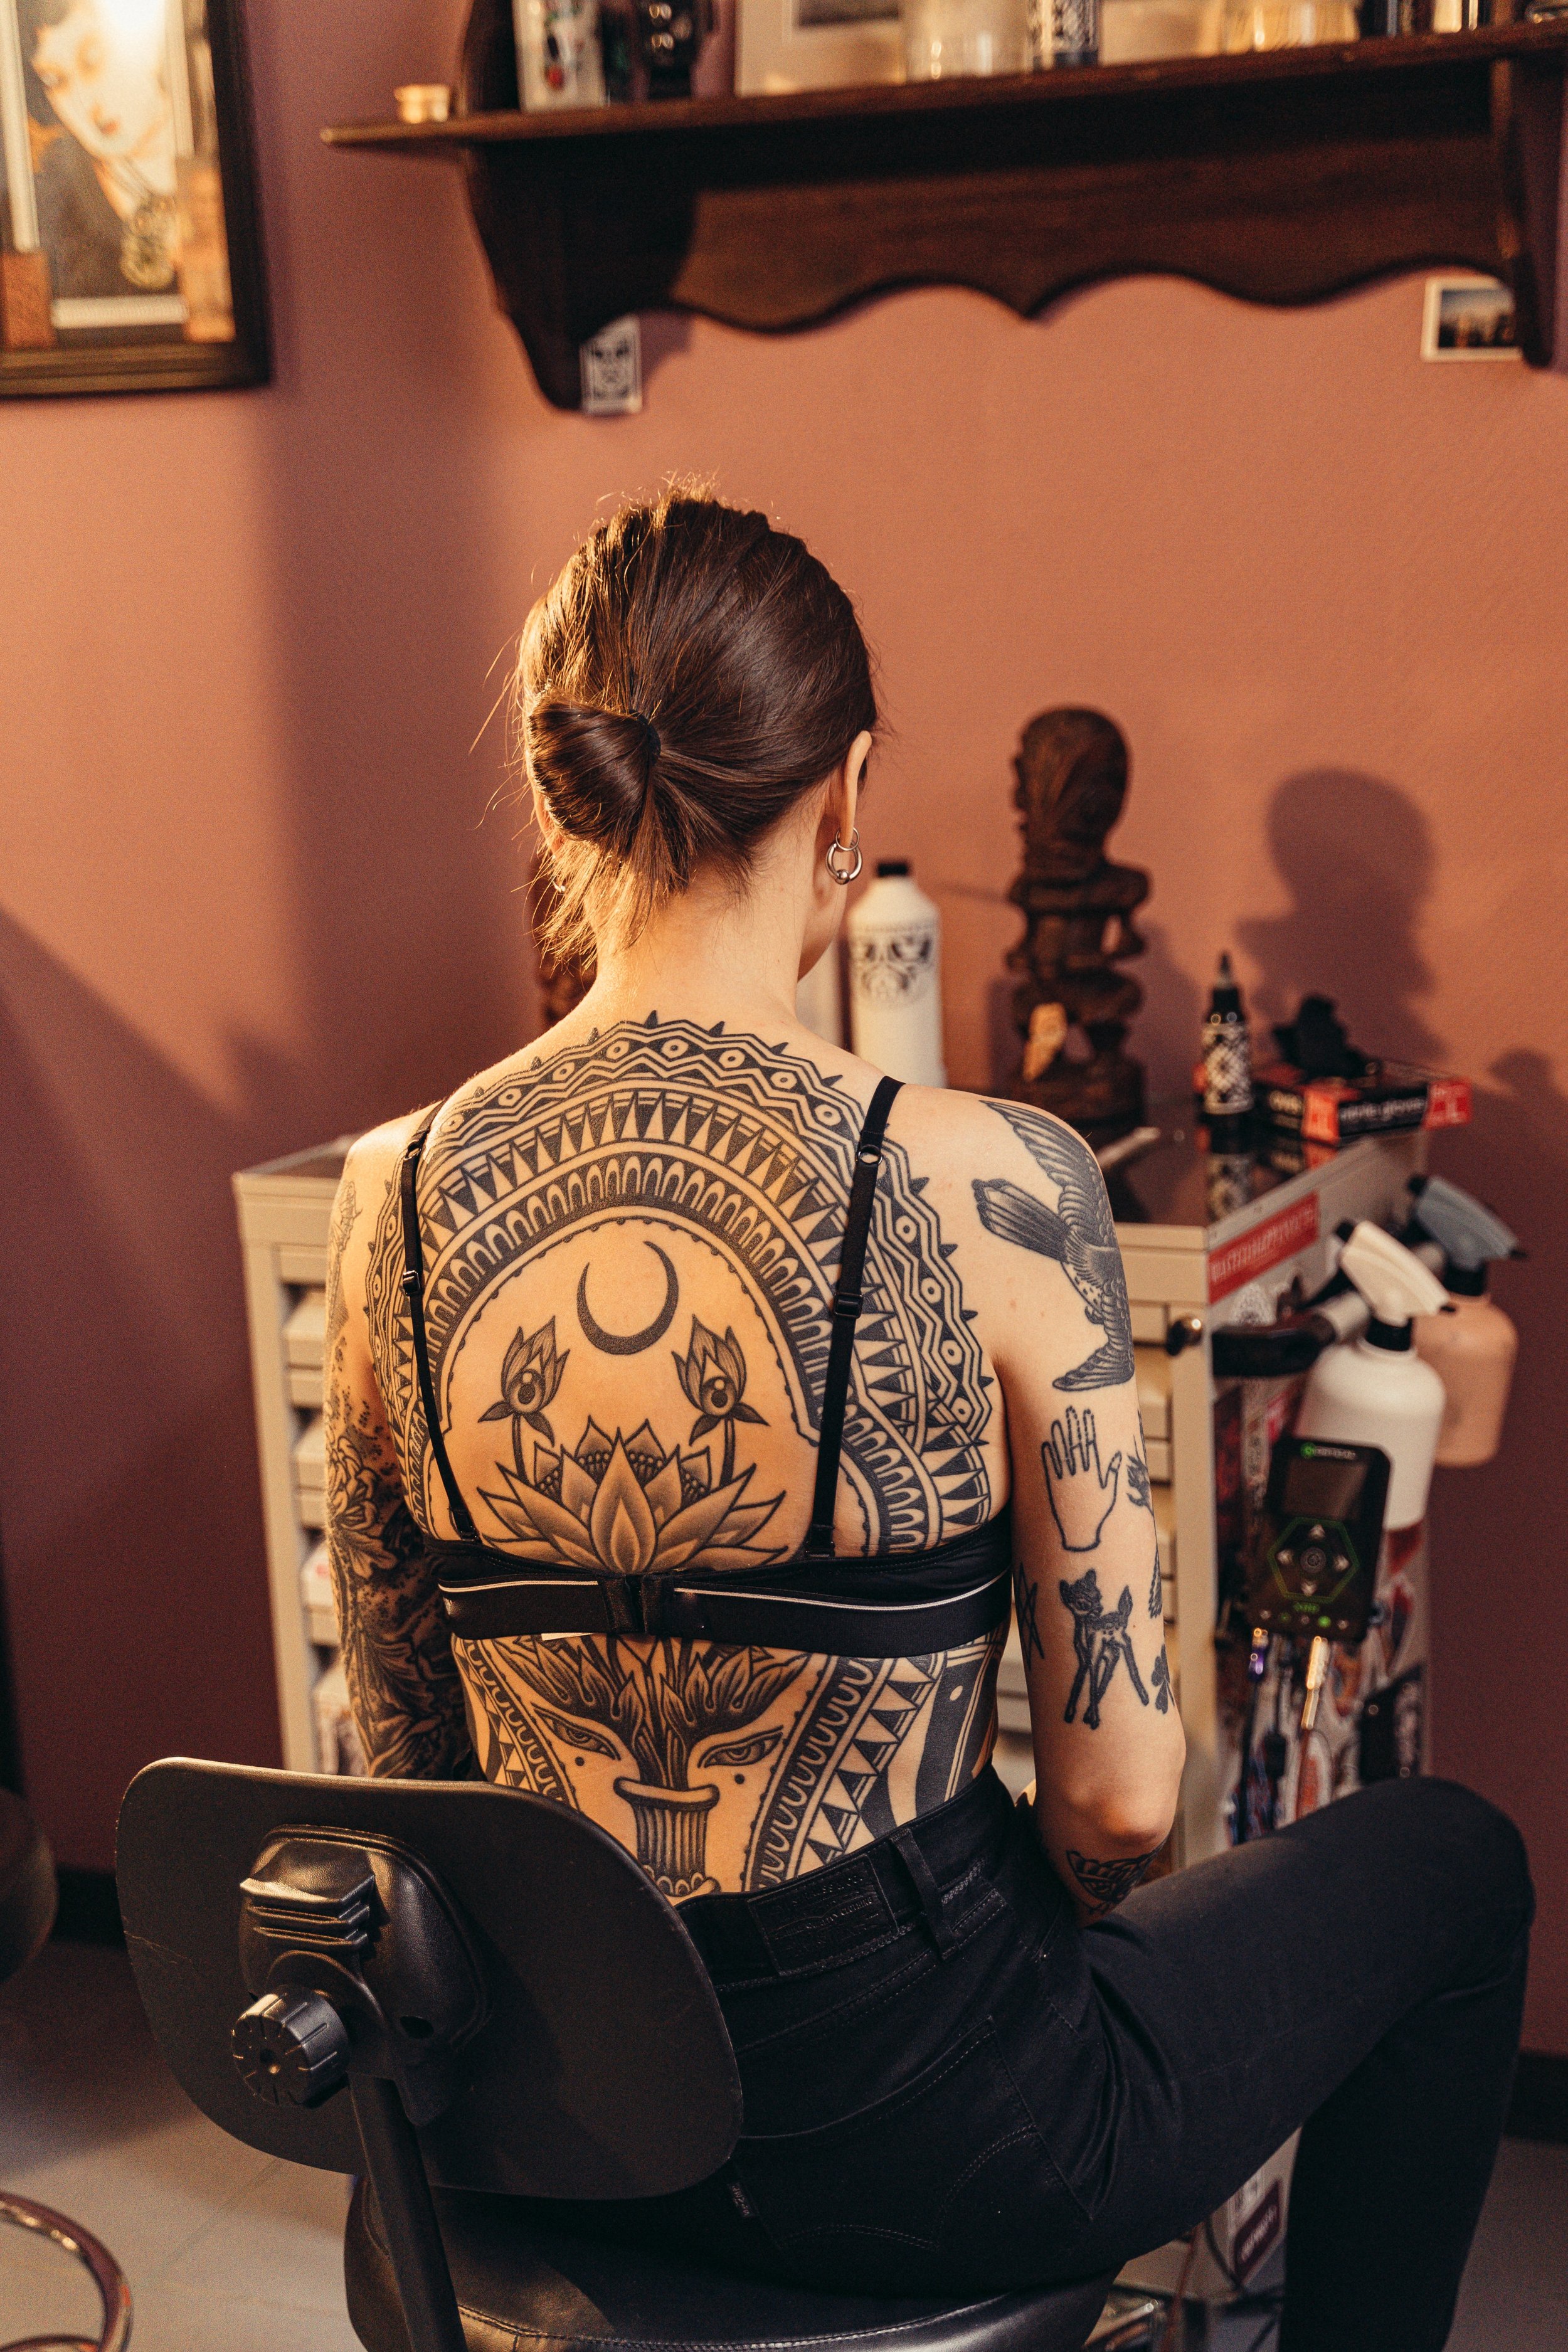 Spine Tattoo Pain - How Much Does It Hurt? - Tattify